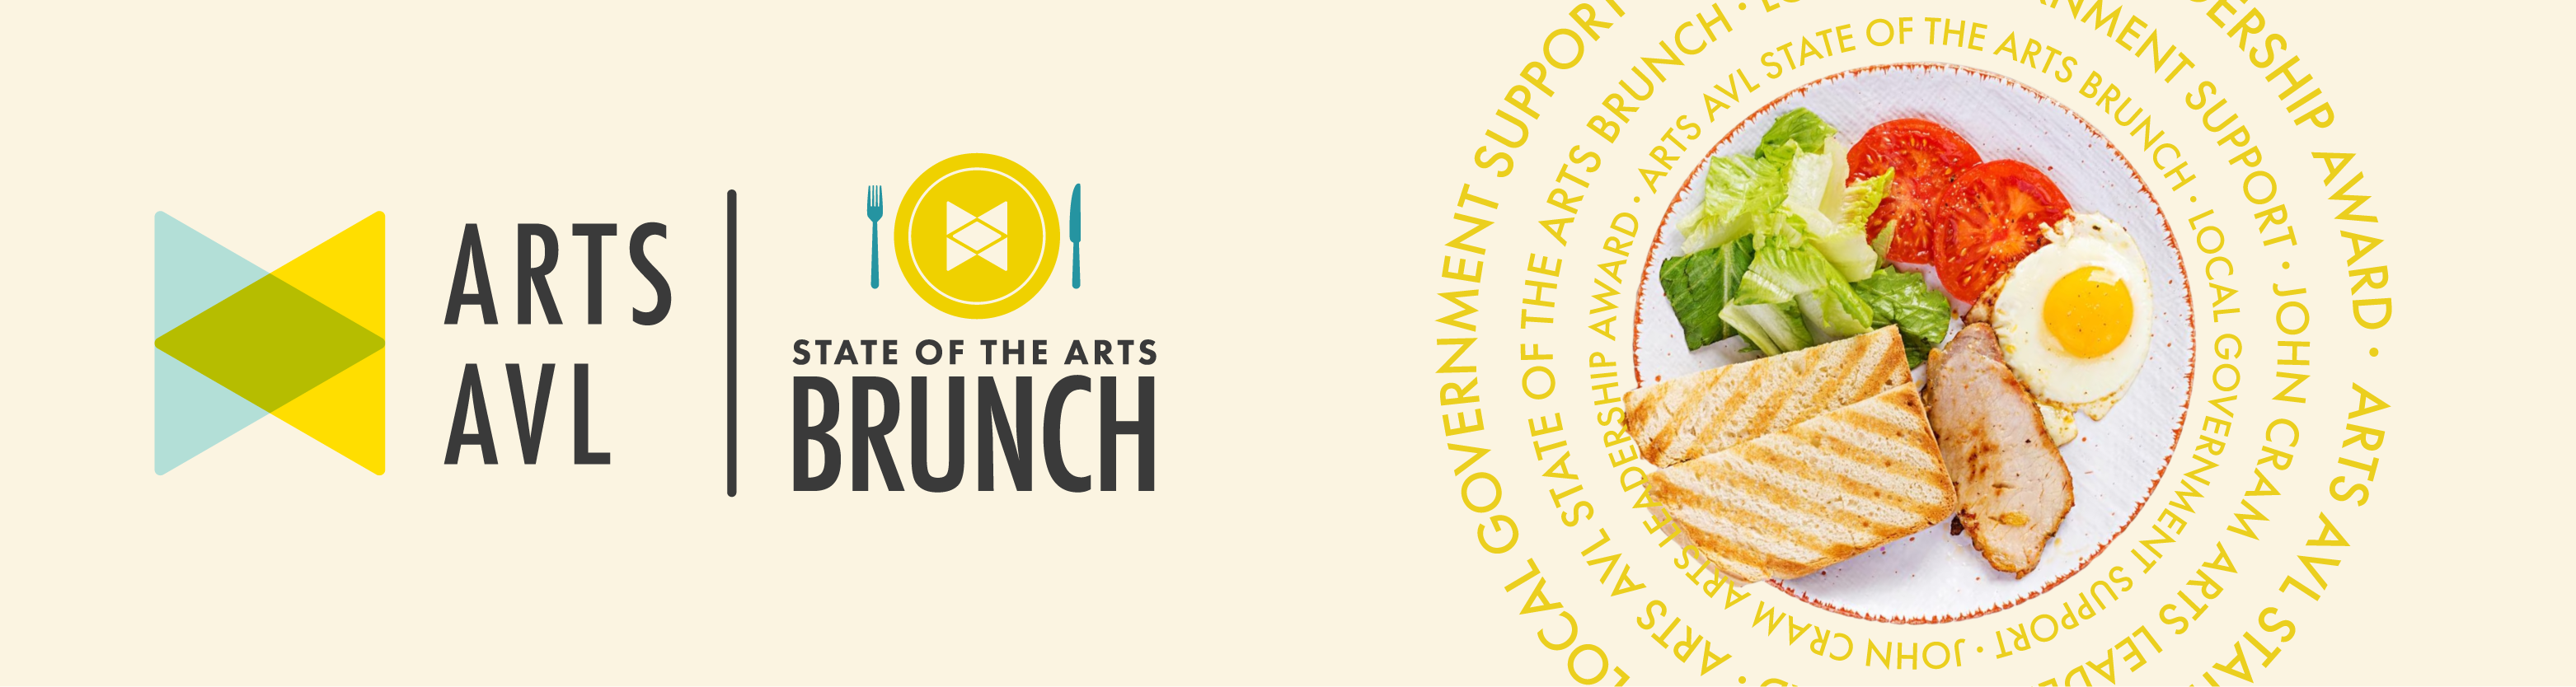 State of the Arts Brunch